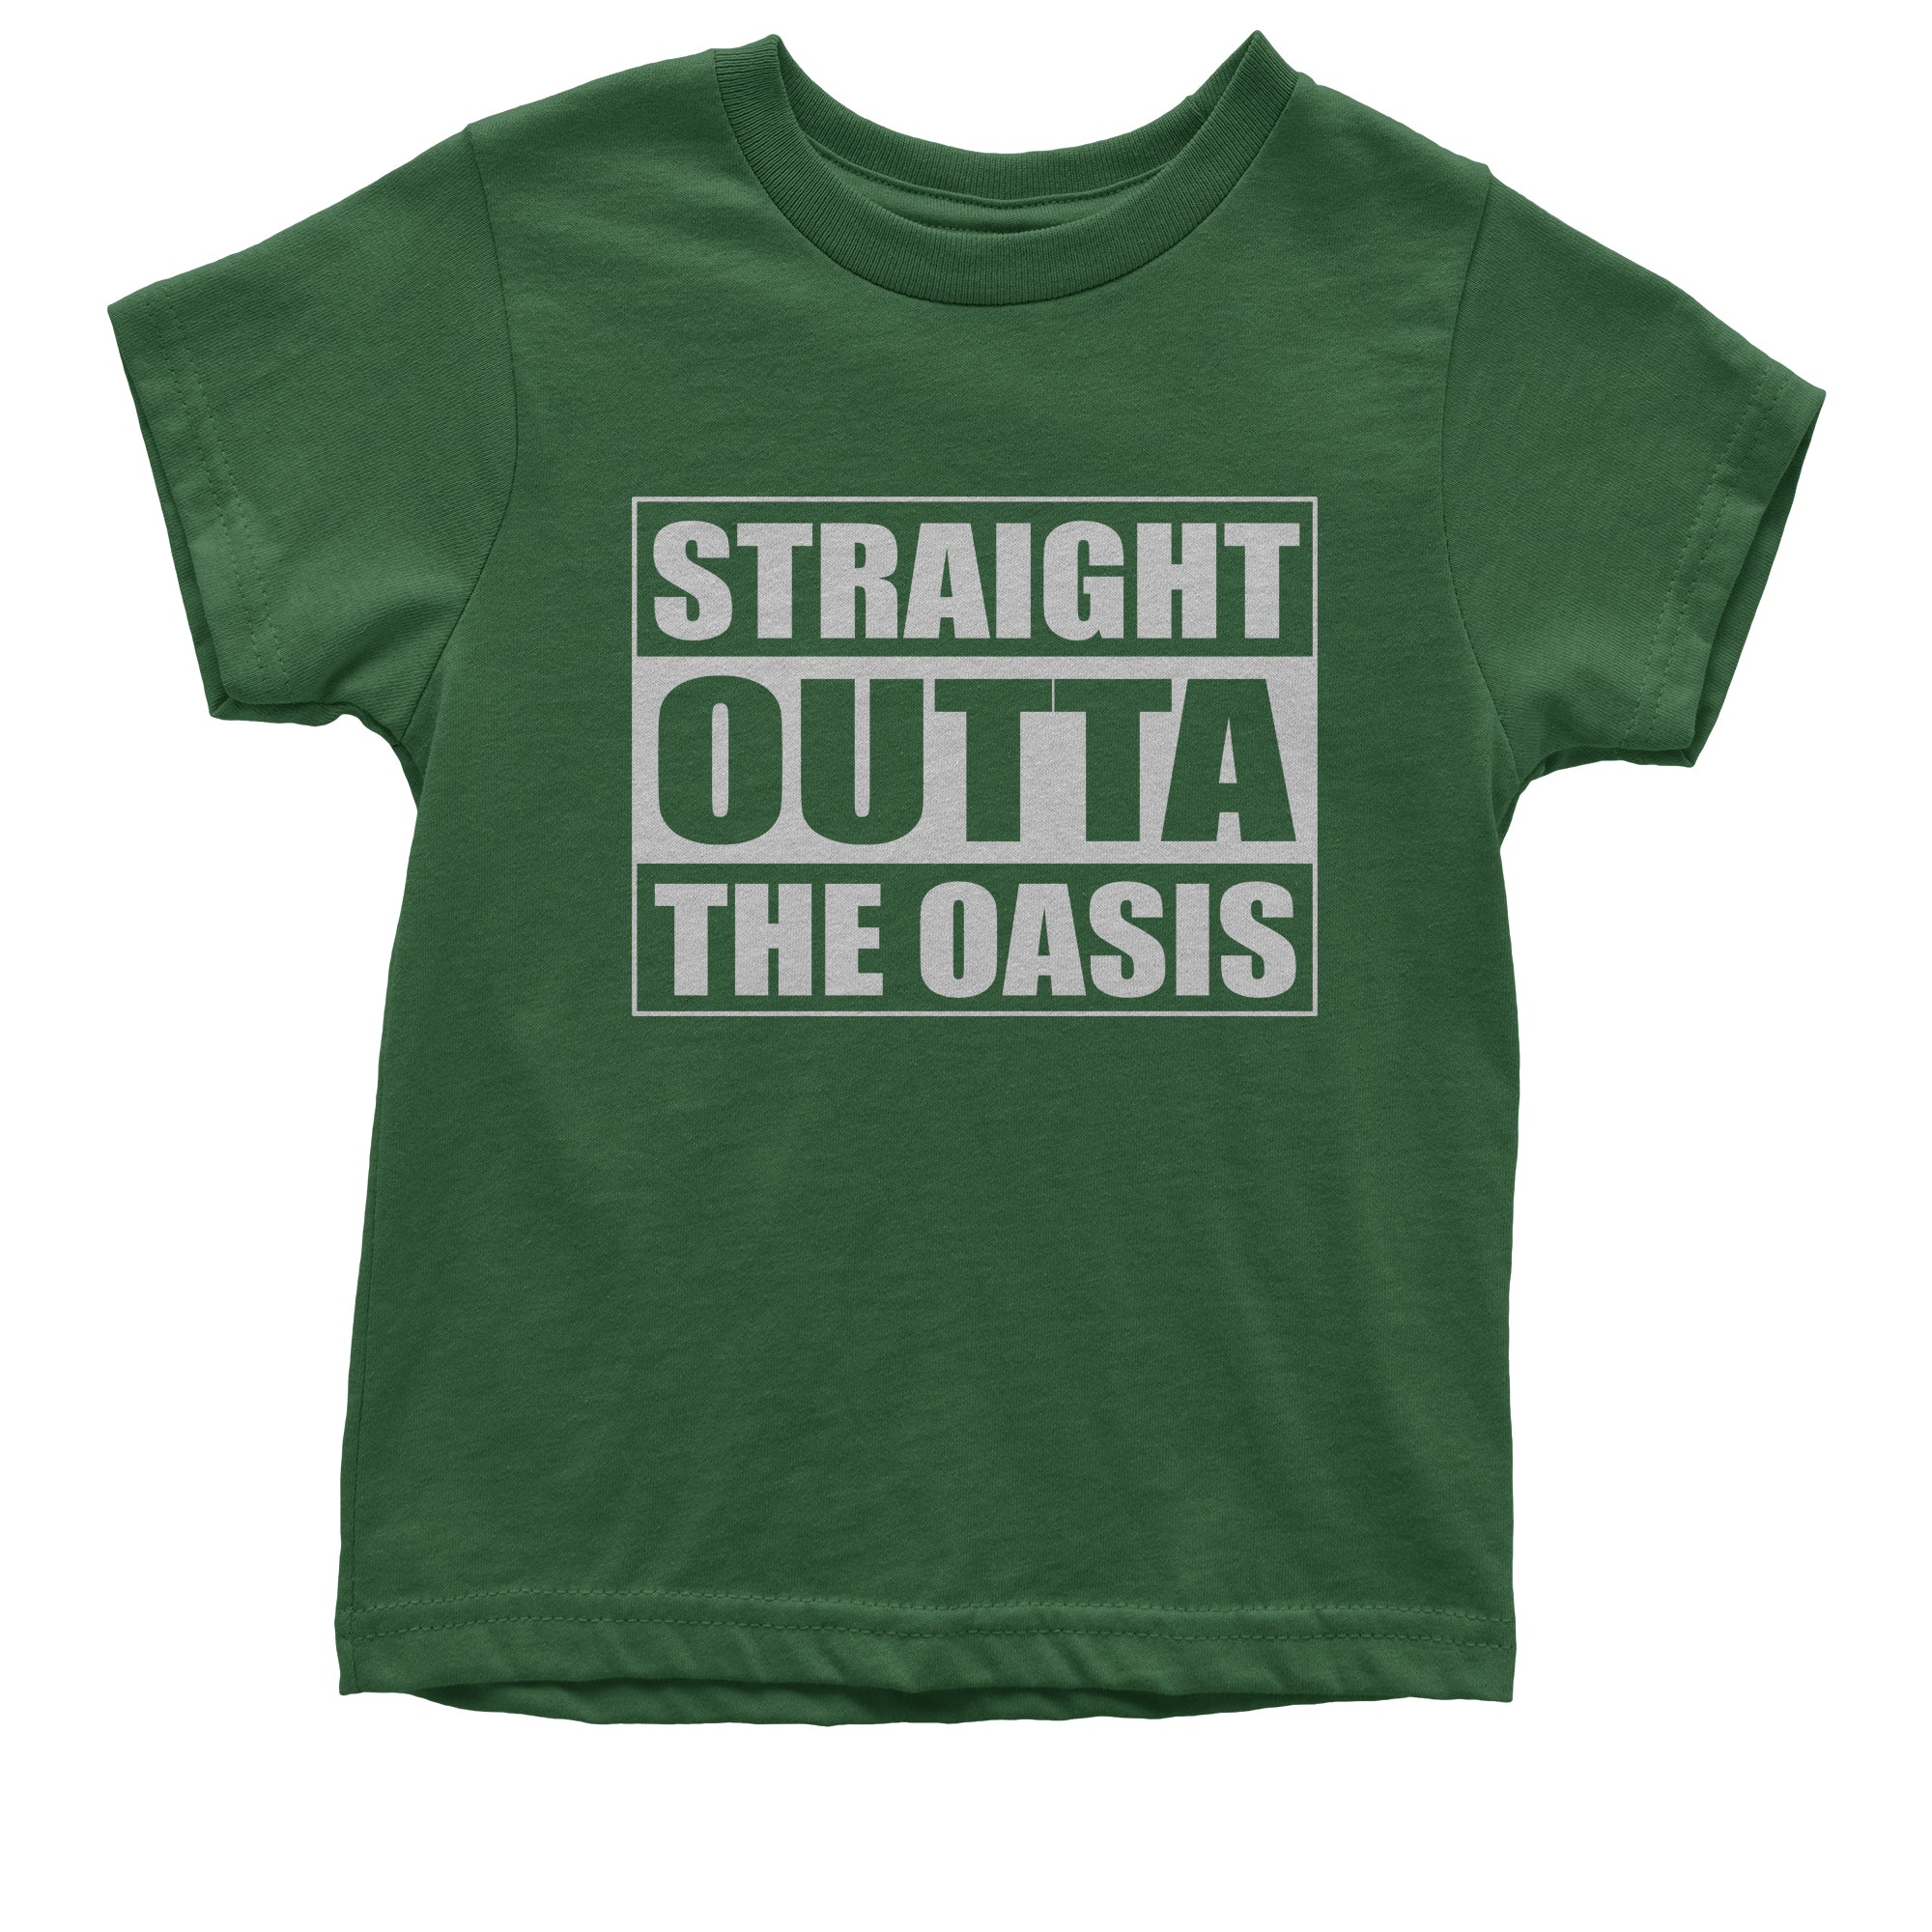 Striaght Outta The Oasis player one ready Kid's T-Shirt